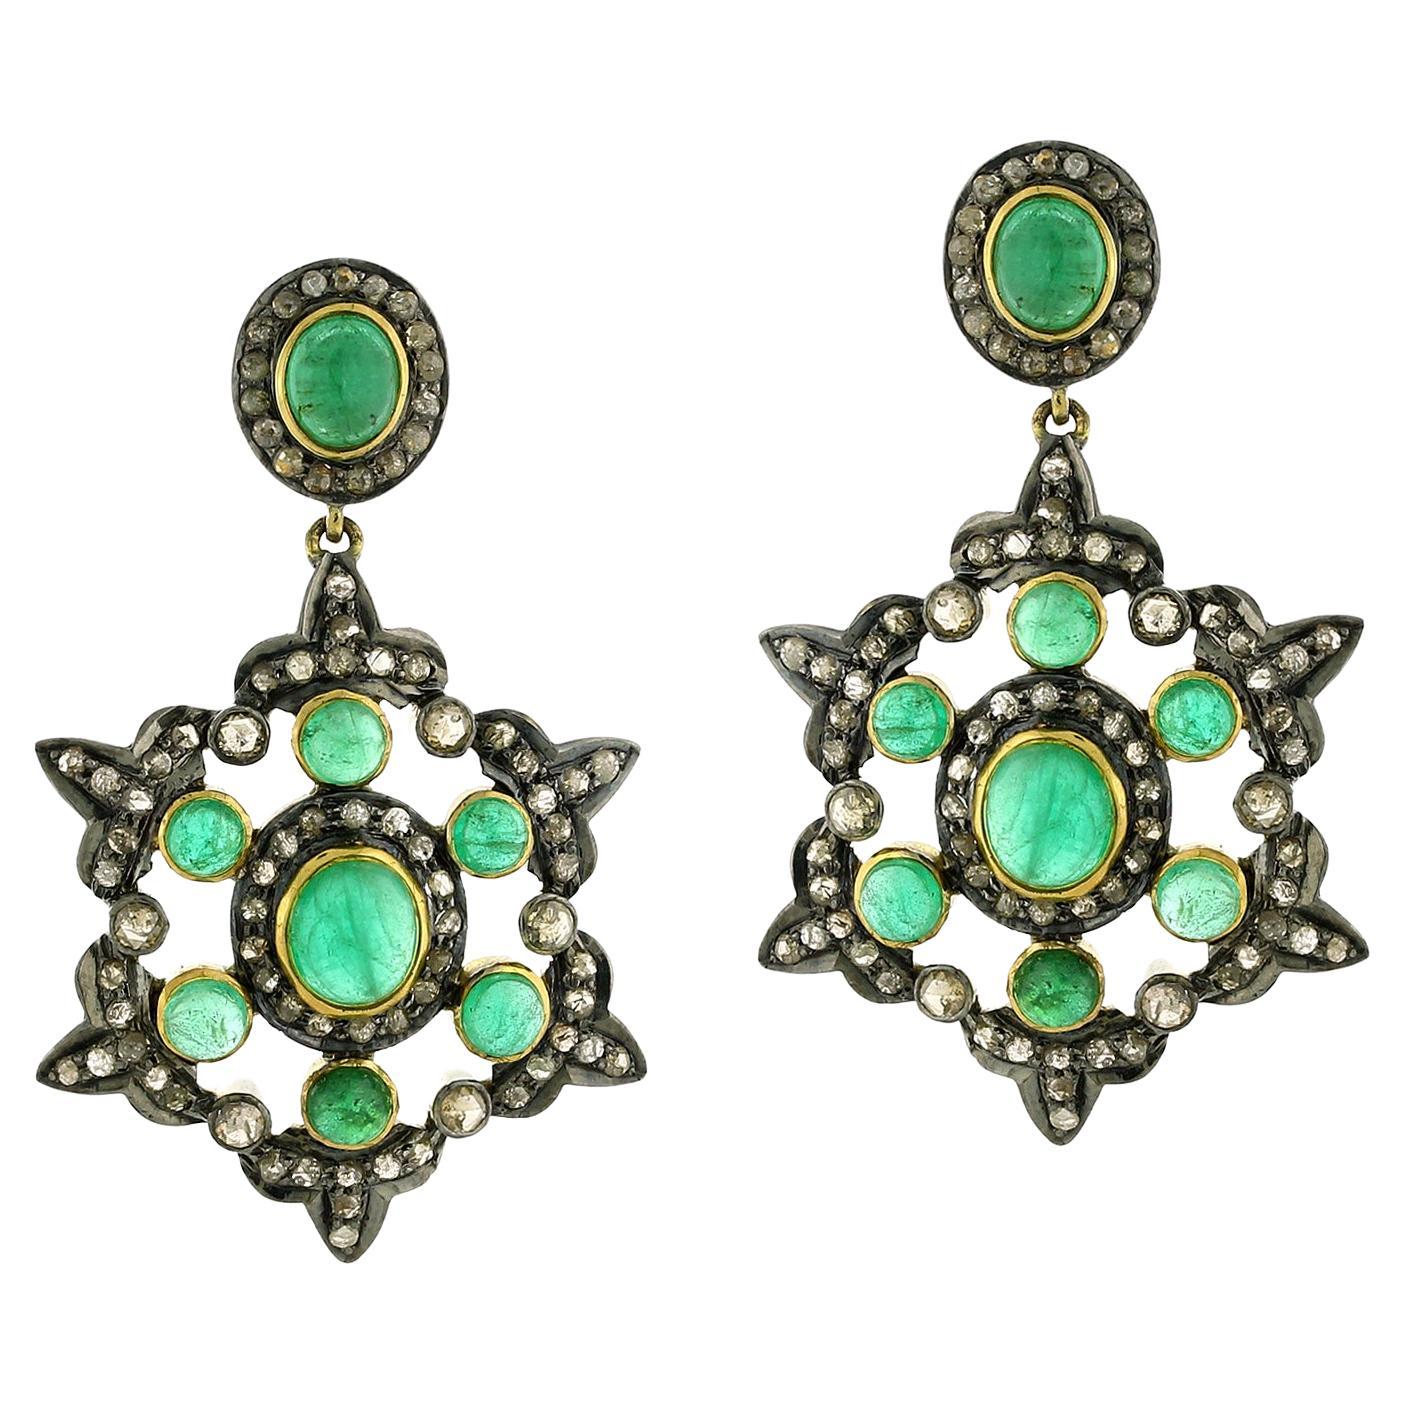 Snow Flakes Shaped Earrings With Emeralds & Pave Diamonds In Gold & Silver